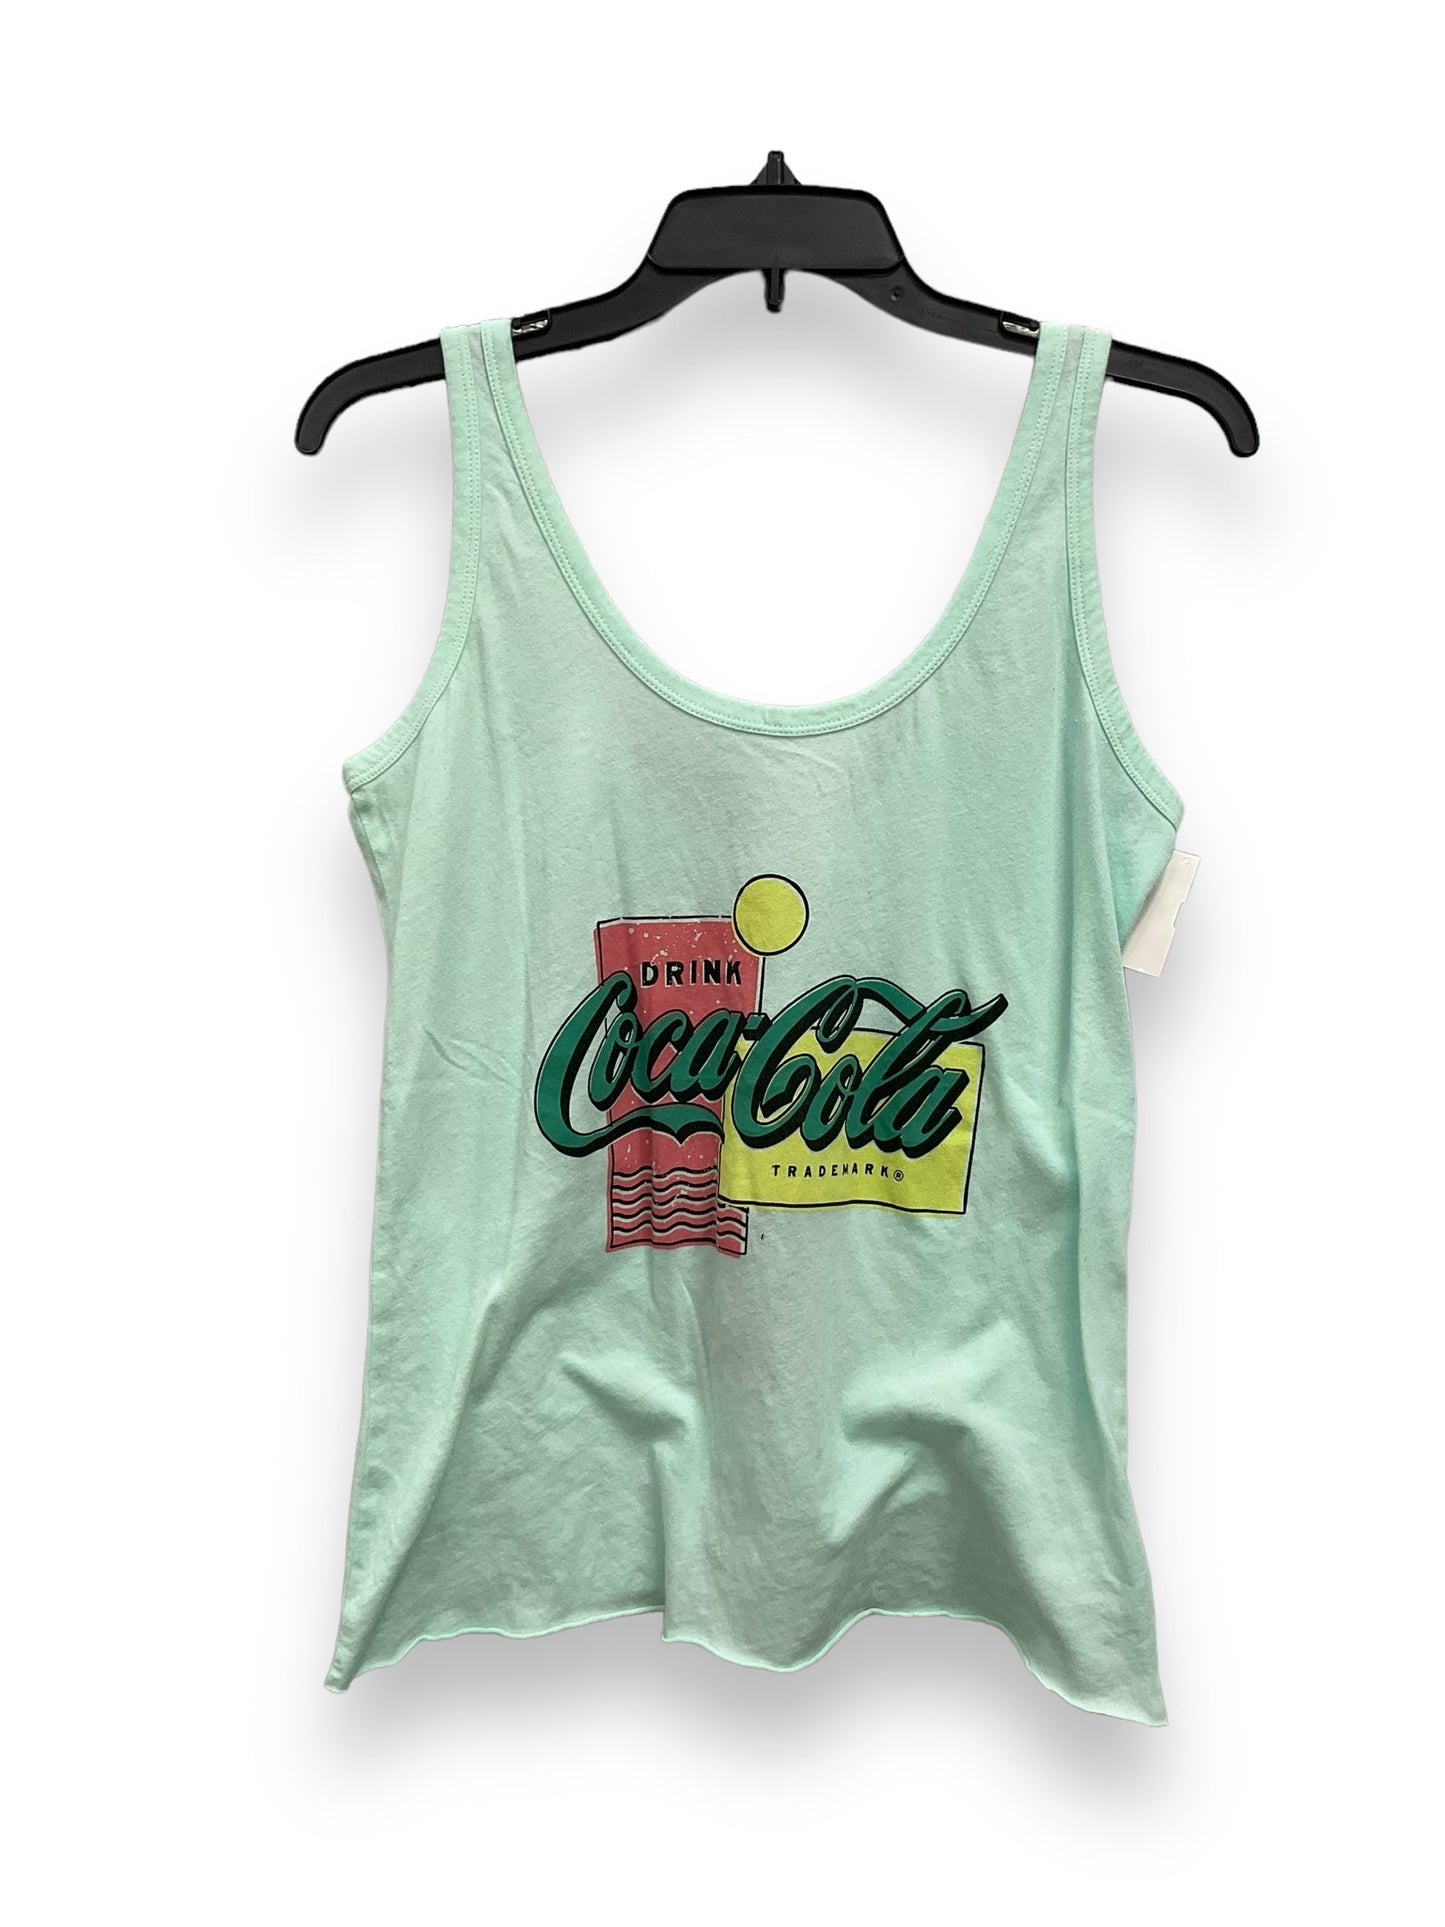 Green Tank Top Clothes Mentor, Size Xs